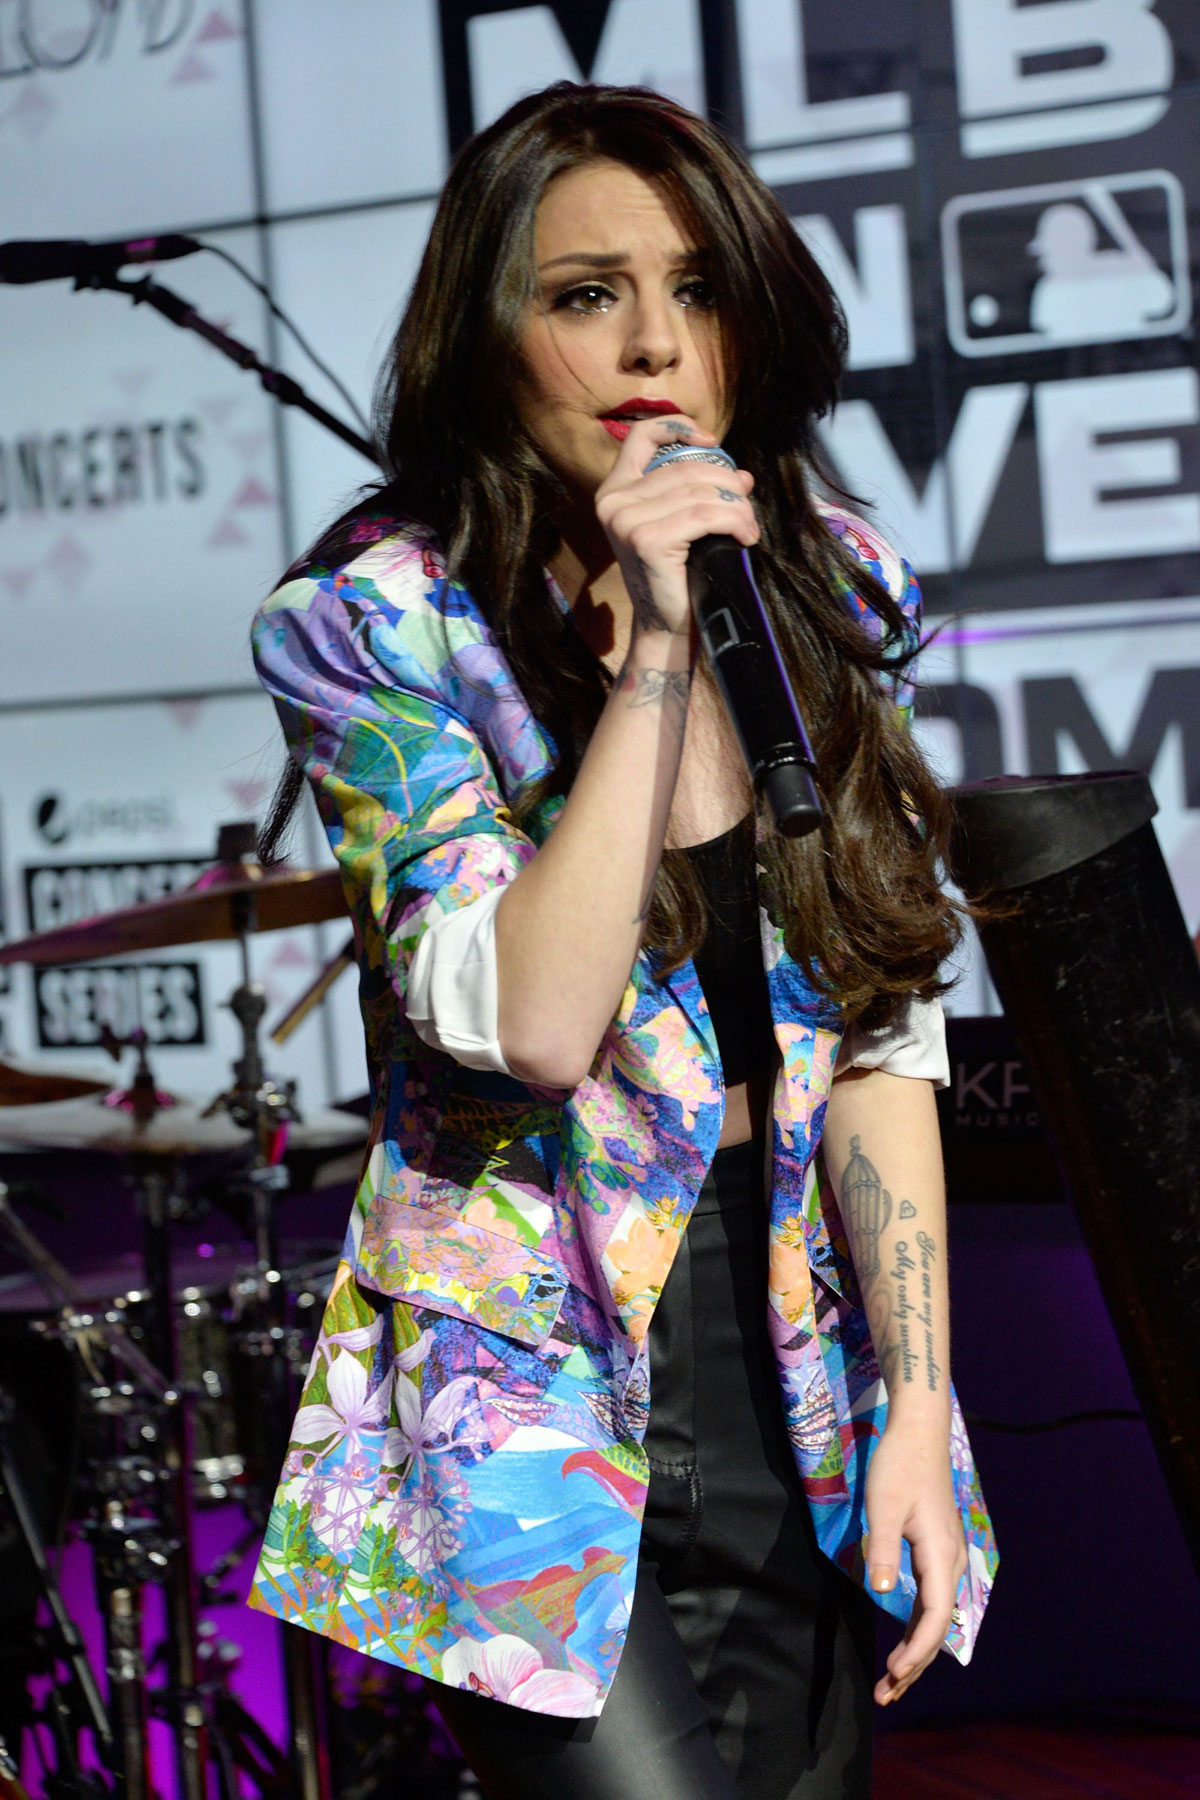 Cher Lloyd performs at MLB Fan Cave